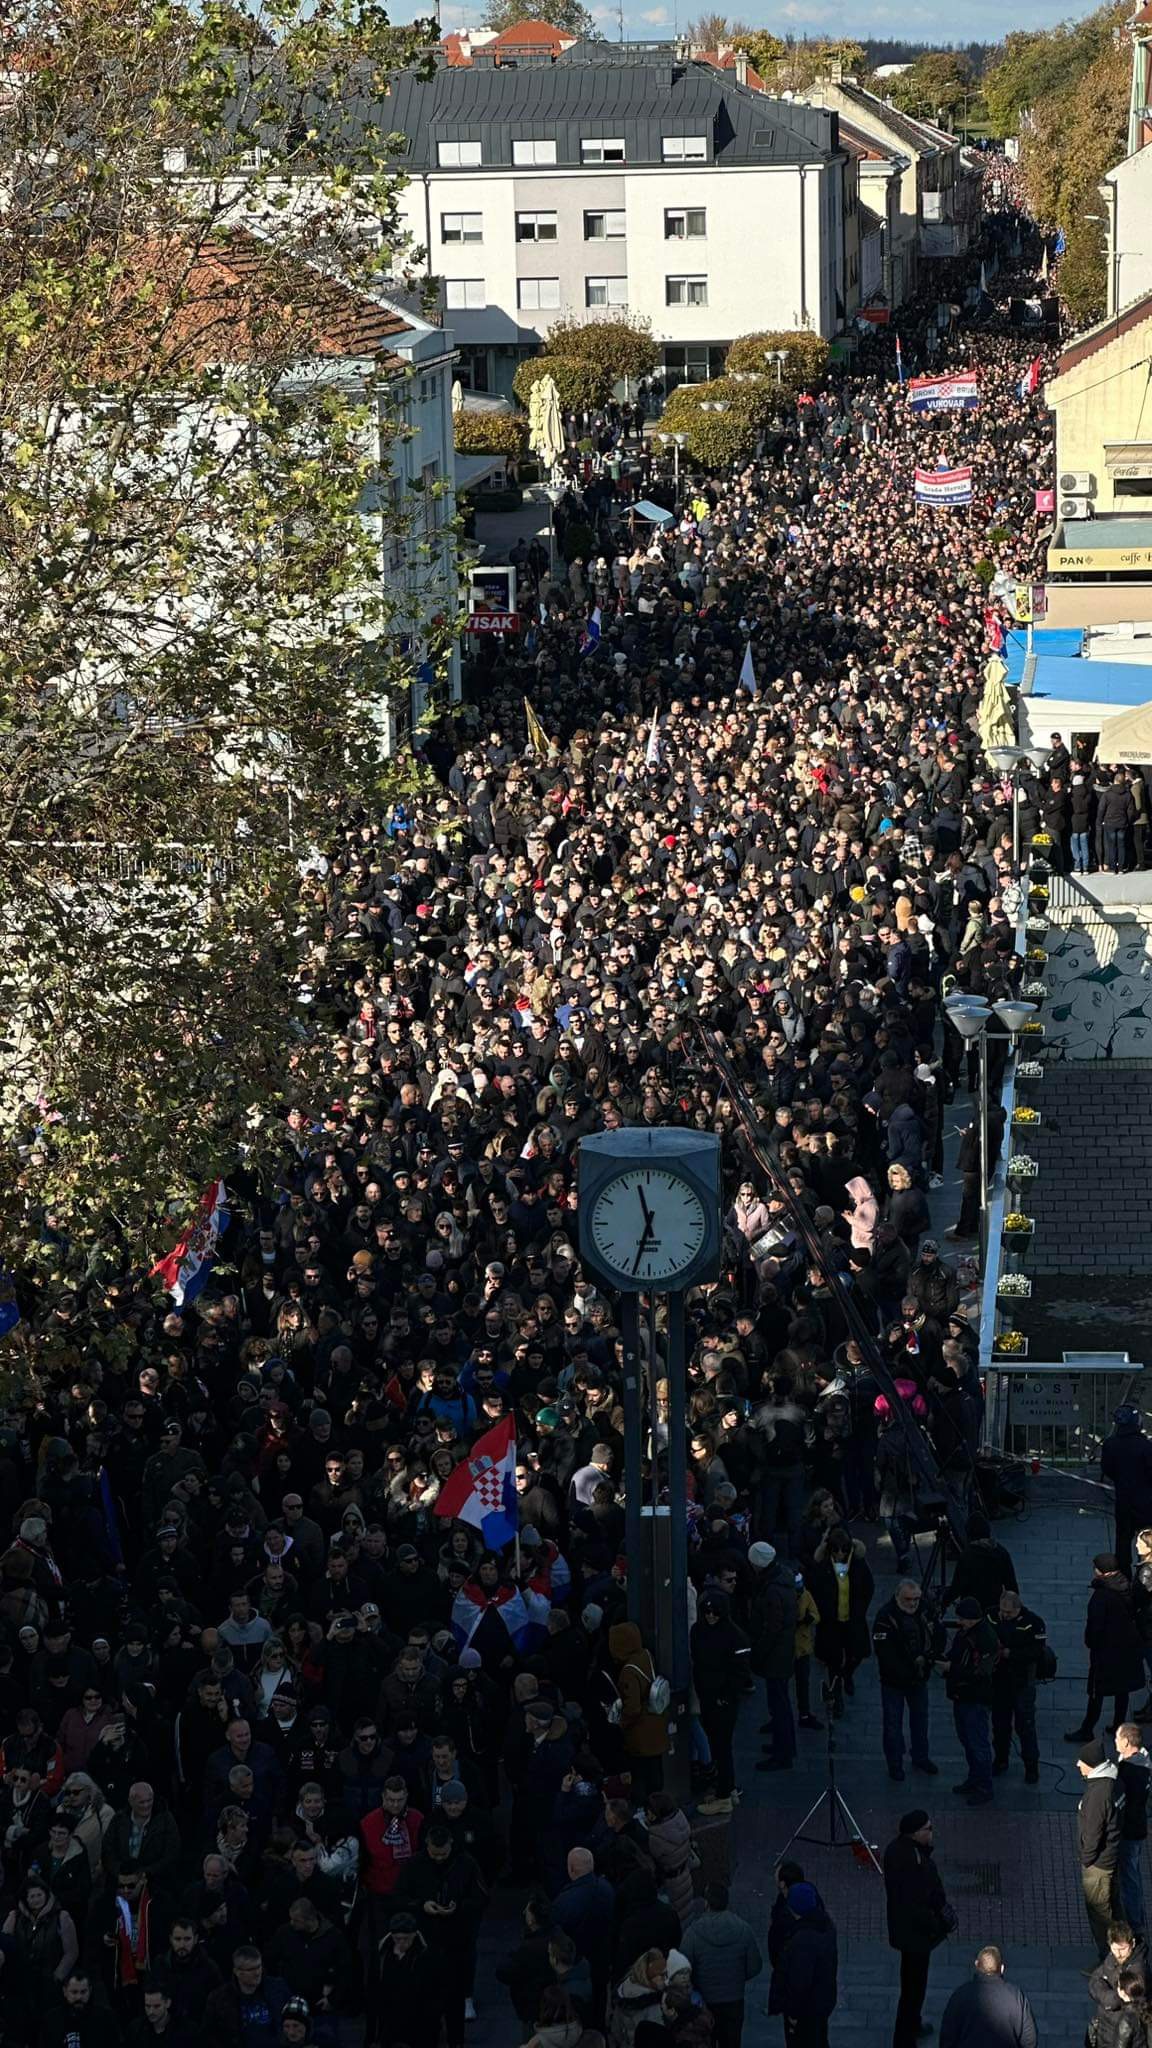 Biggest remembrance procession in Vukovar yet as 15,000 march